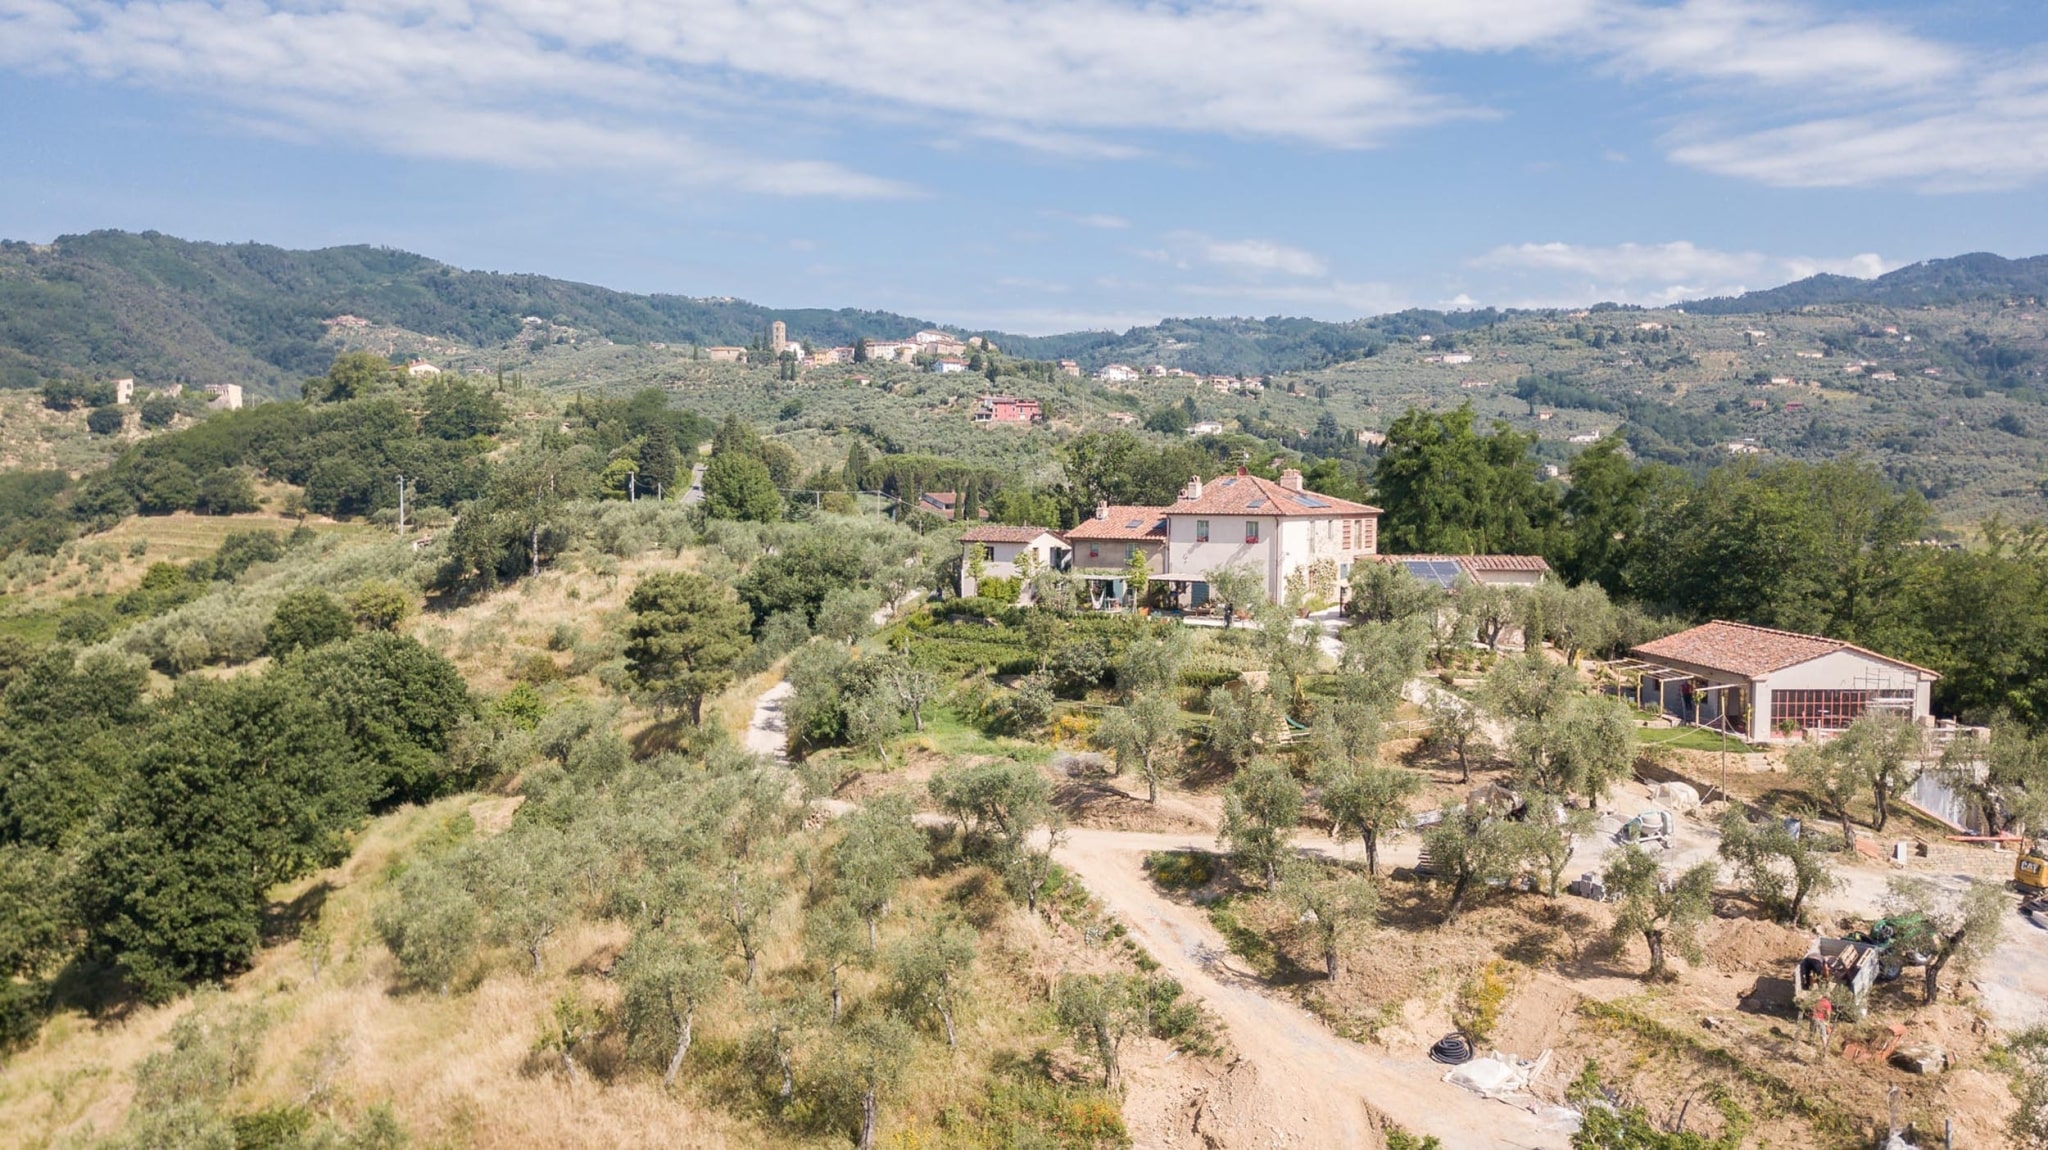 Rent Villa Neri for a unique Tuscan getaway. 7 bedrooms, 7+3 baths, stunning countryside views. Explore Florence and Lucca nearby.